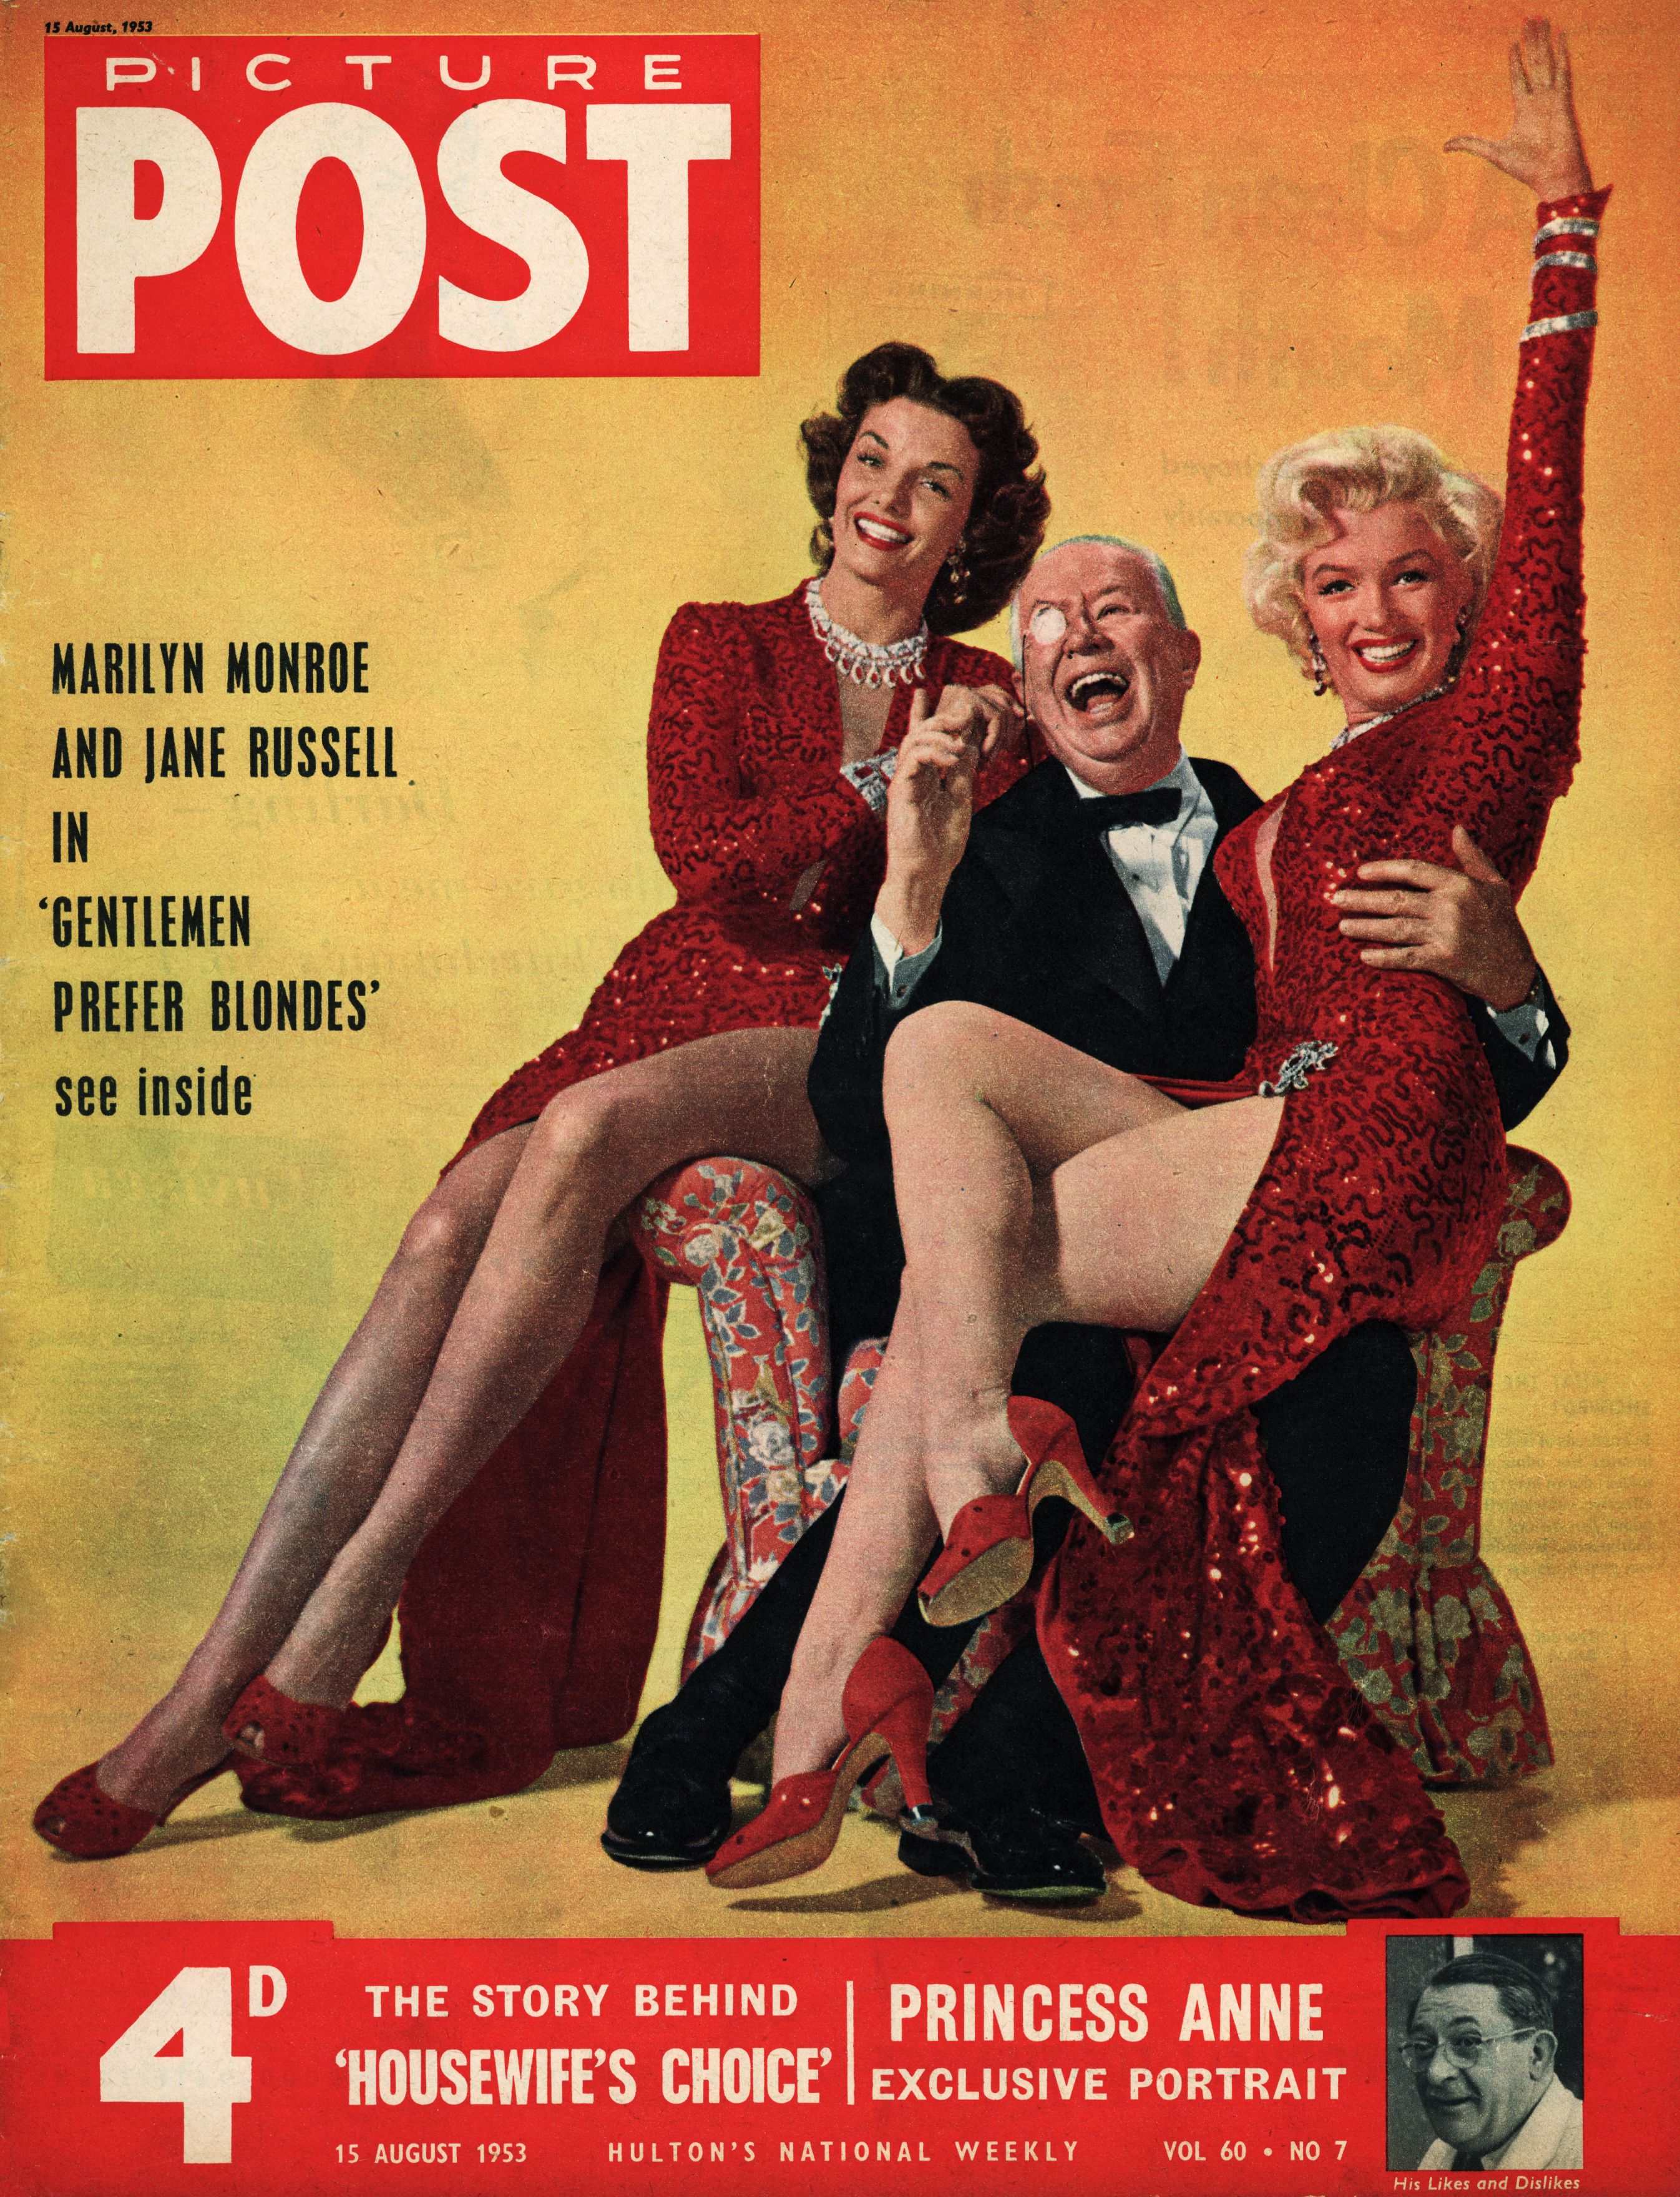 The cover of Picture Post magazine featuring a portrait of American actresses Jane Russell and Marilyn Monroe with Charles Coburn